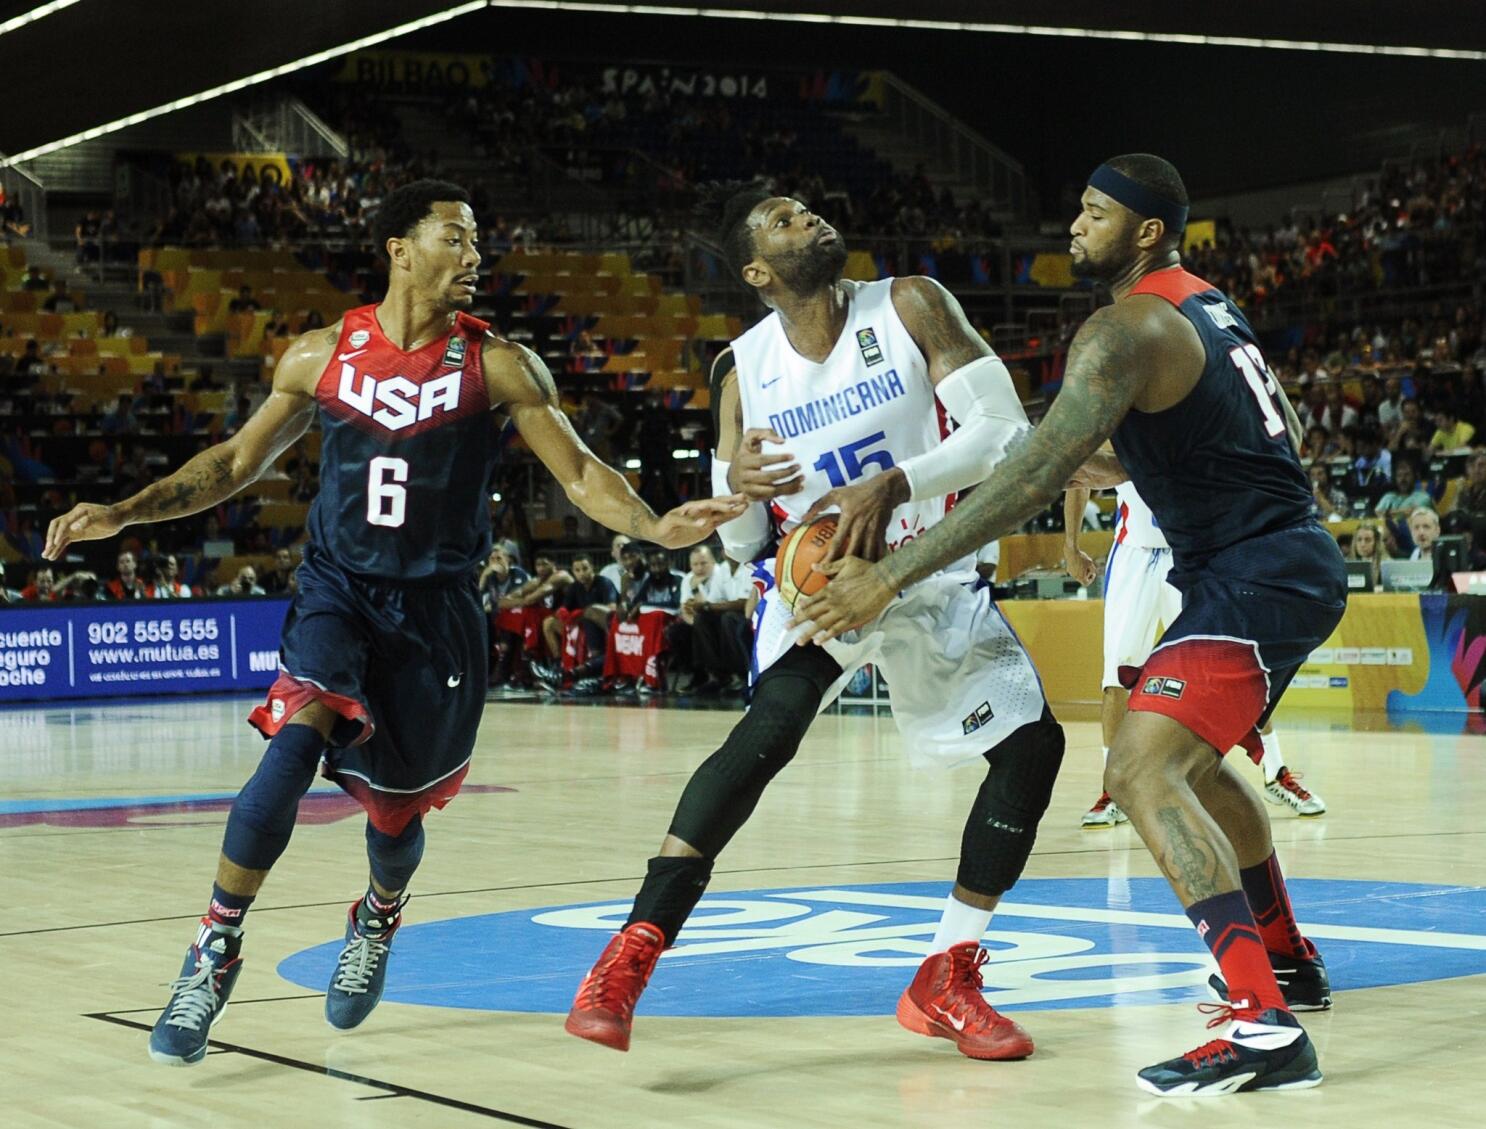 Kenneth Faried Of USA In Action At FIBA World Cup Basketball Match